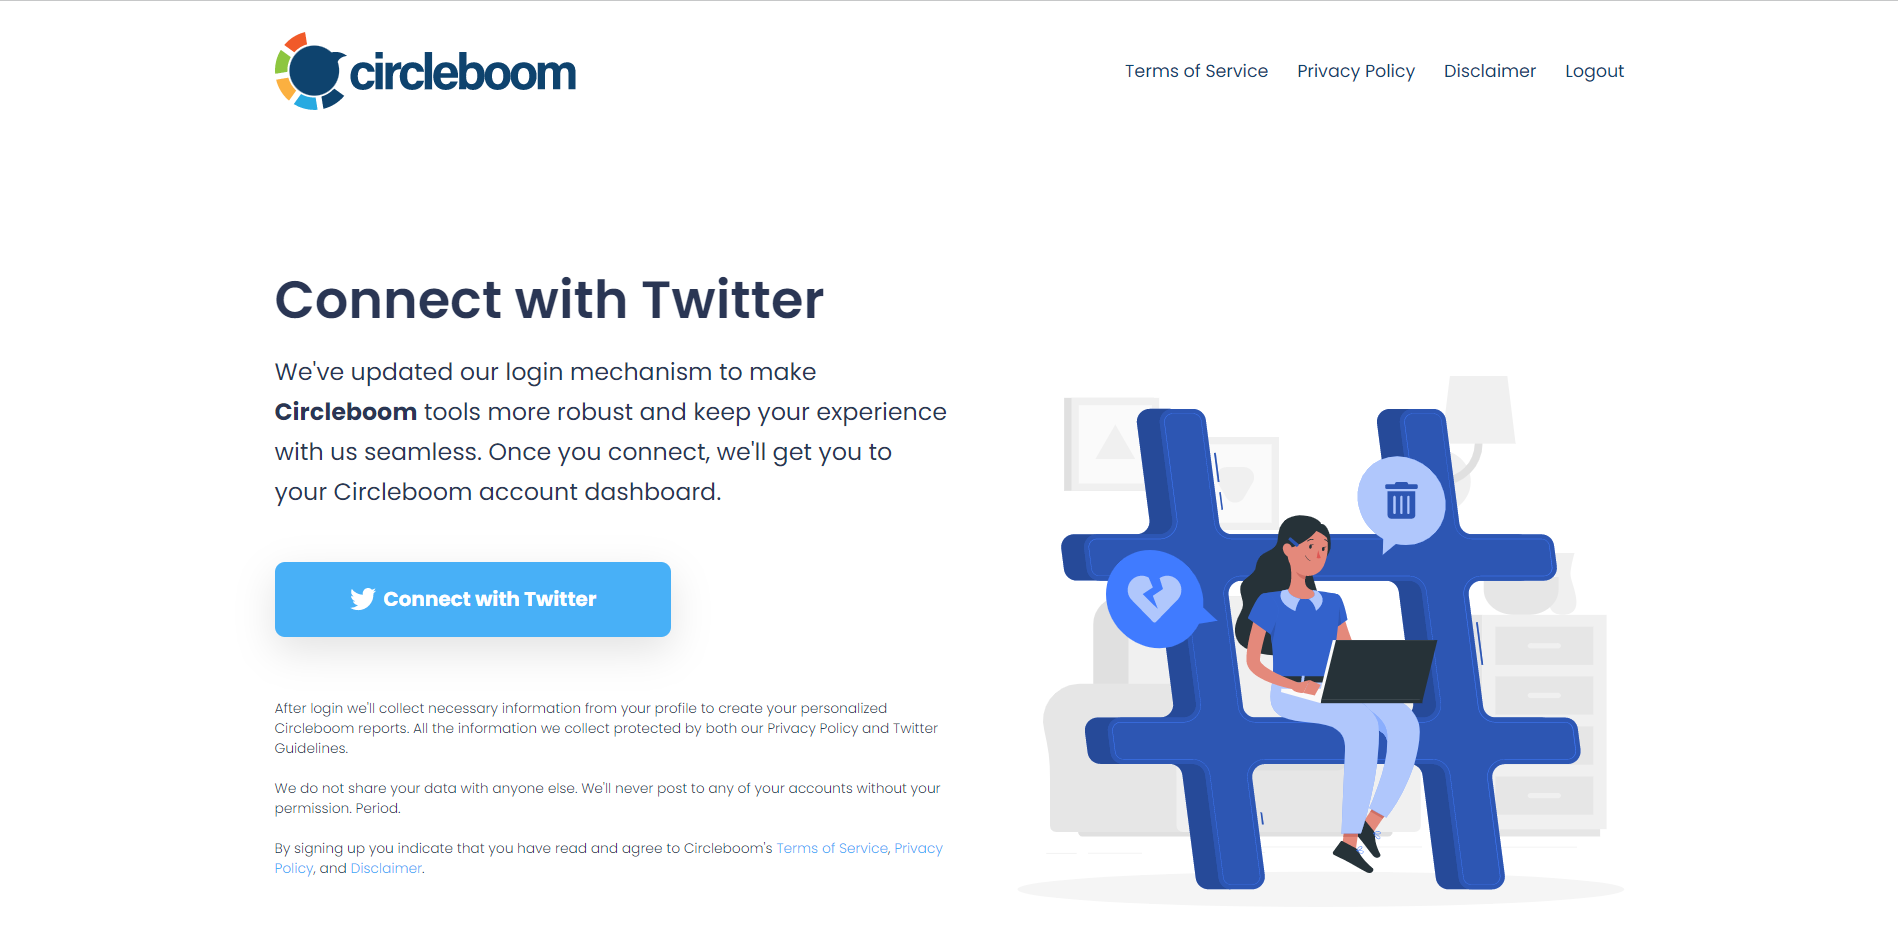 Tweet delete by date is an easy-peasy process with Circleboom Twitter!